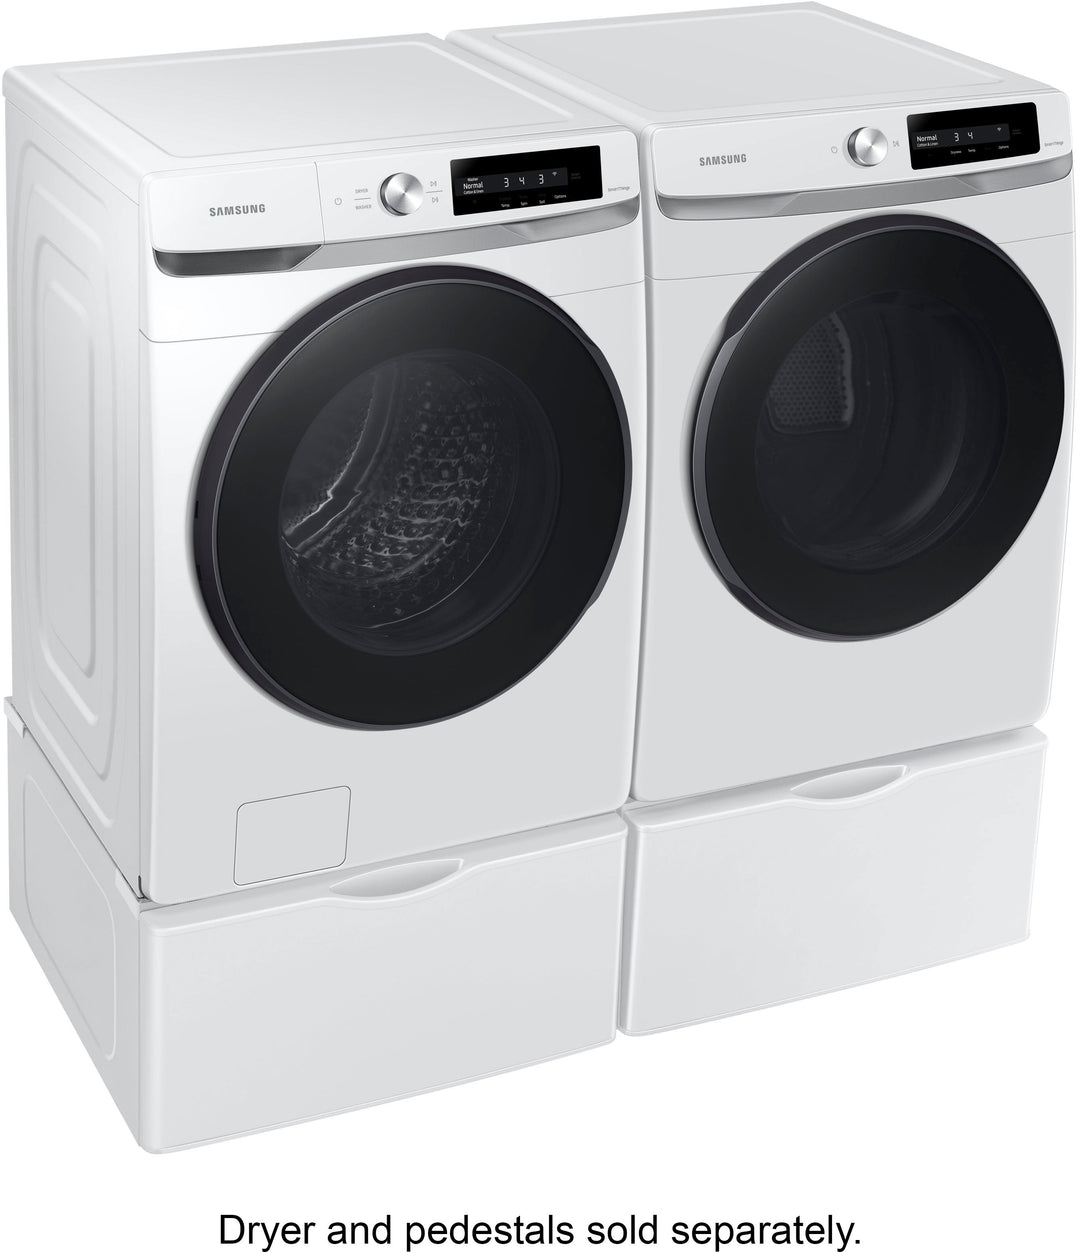 Samsung - 4.5 cu. ft. Large Capacity Smart Dial Front Load Washer with Super Speed Wash - White_2